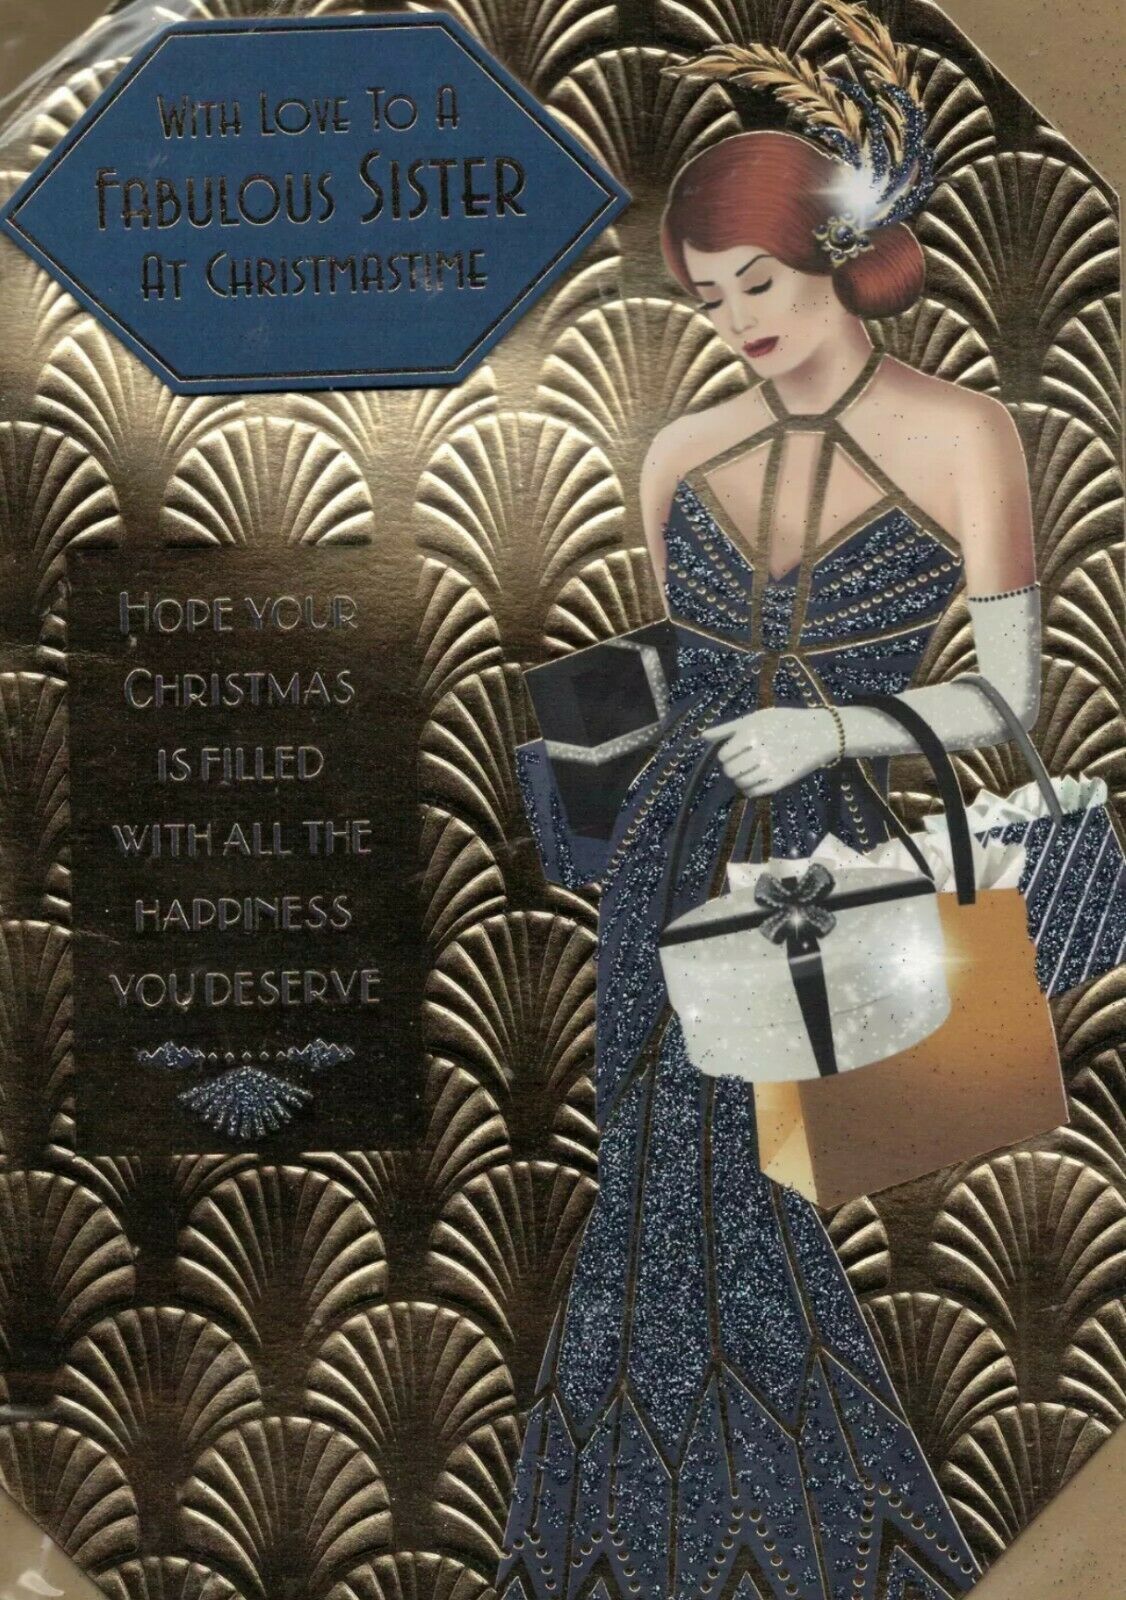 Art Deco Christmas Card - With Love To A Fabulous Sister At Christmastime